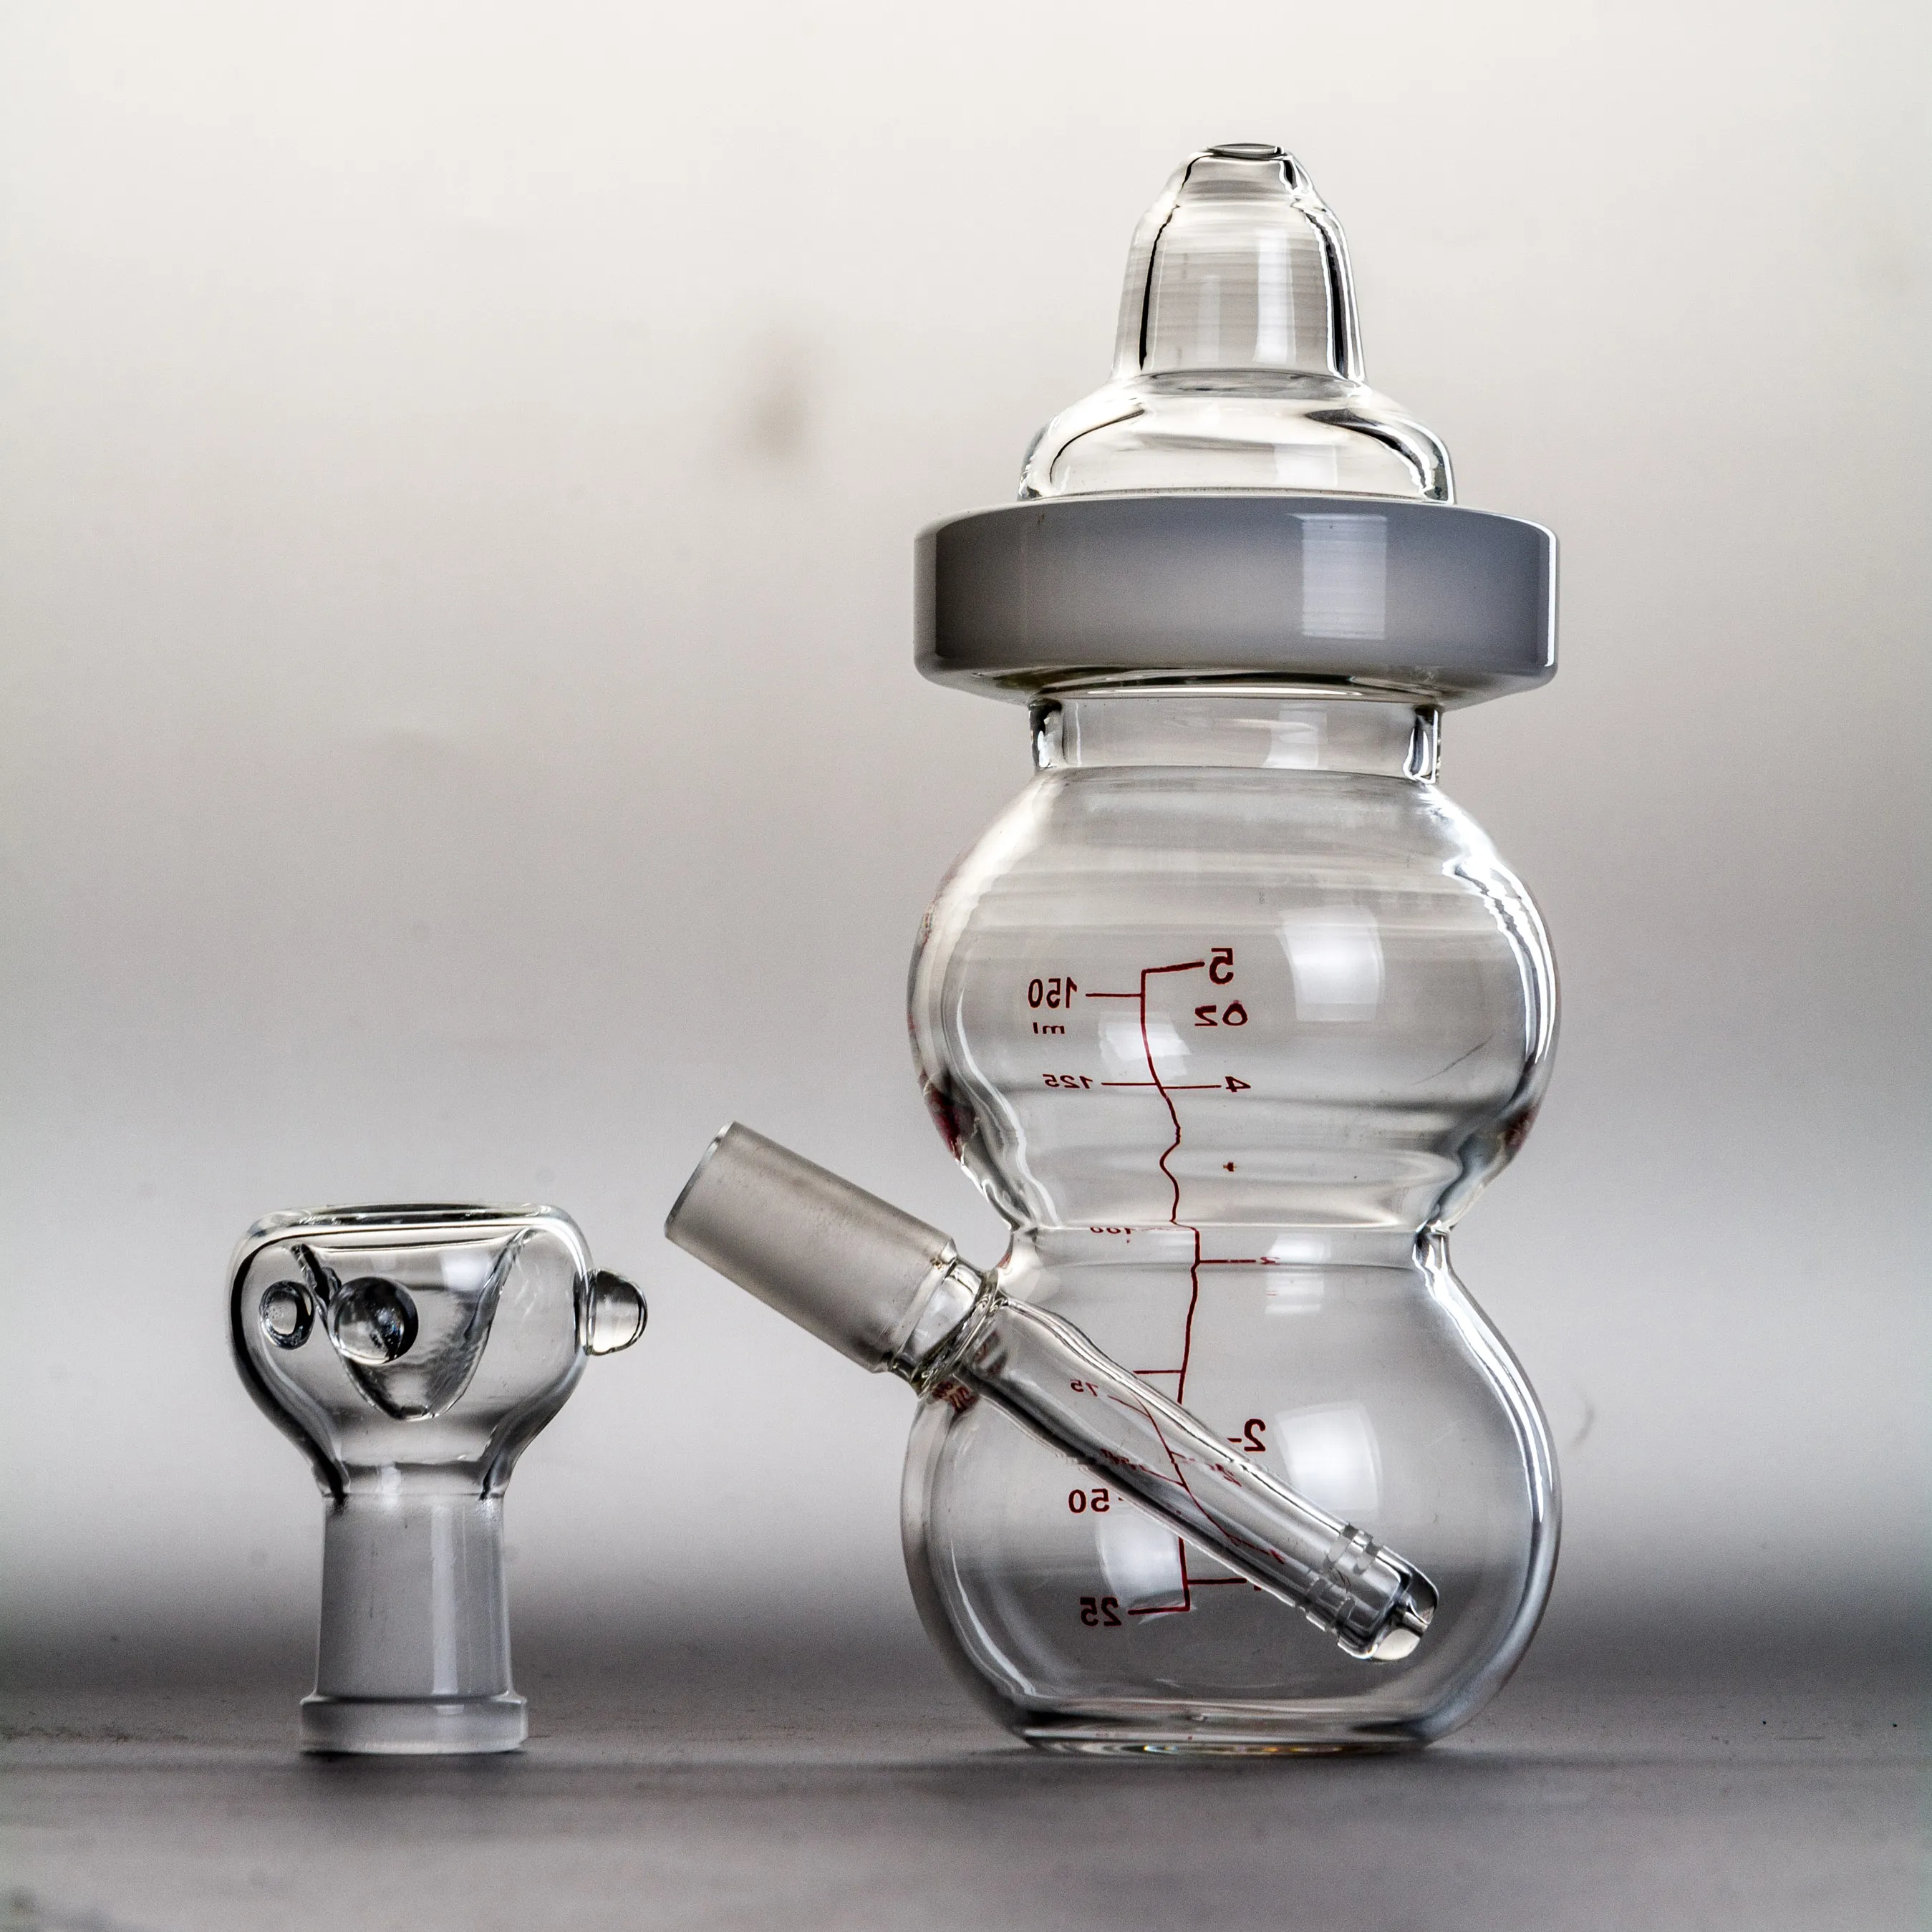 Babybottle Glass Bongs Portable Hookahs Bubbler Mini Smoking Oil Rig Ash Dab Small Recycler Water Pipes Heady Smoking Accessories